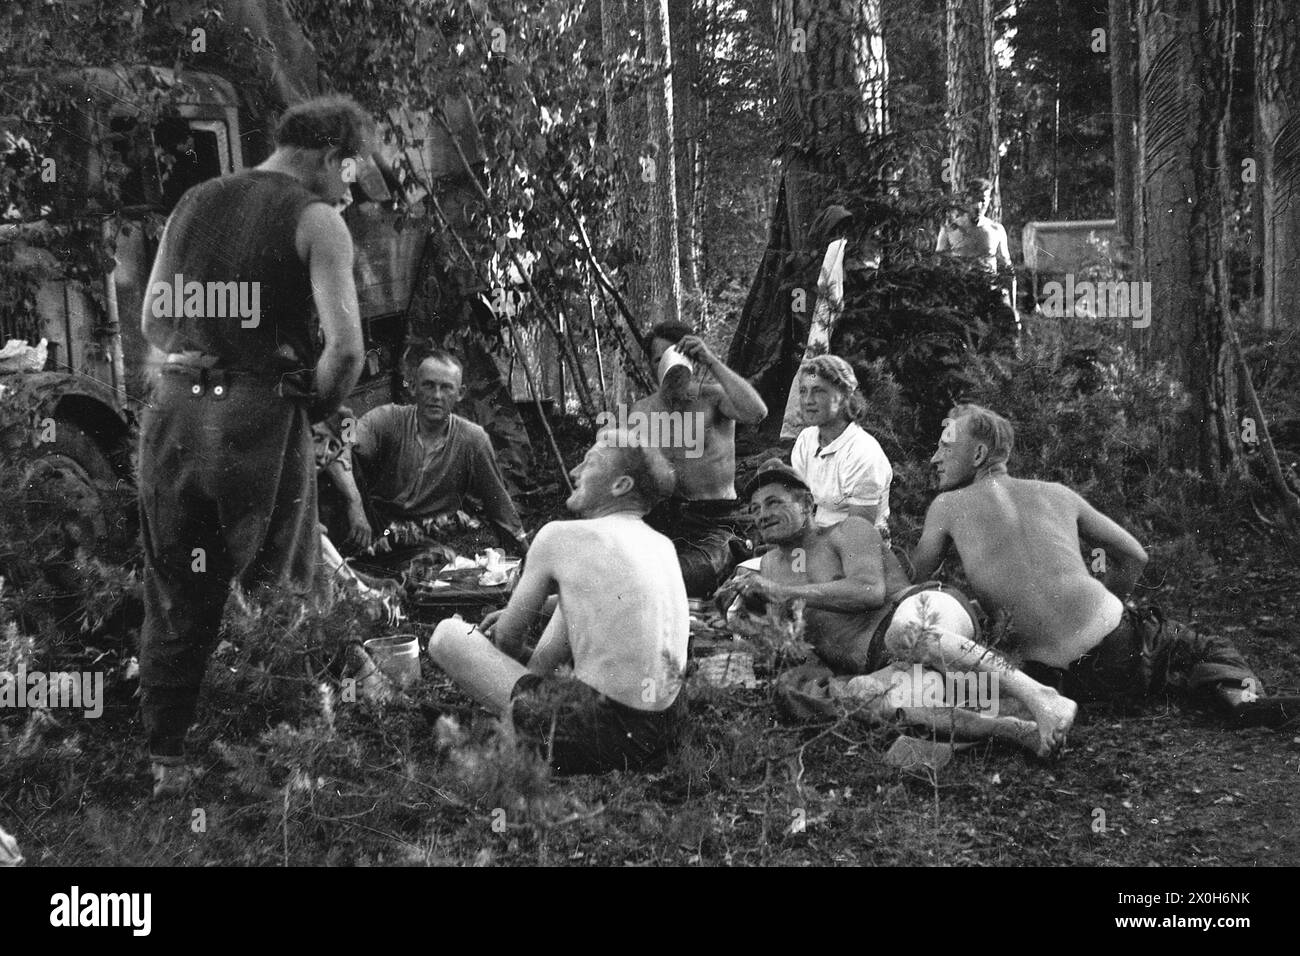 Soldiers are bivouacking in the forest. They are happy and eating. A woman is sitting with the group. The picture was taken by a member of the 154th Infantry Regiment / 58th Infantry Division, in France. [automated translation] Stock Photo